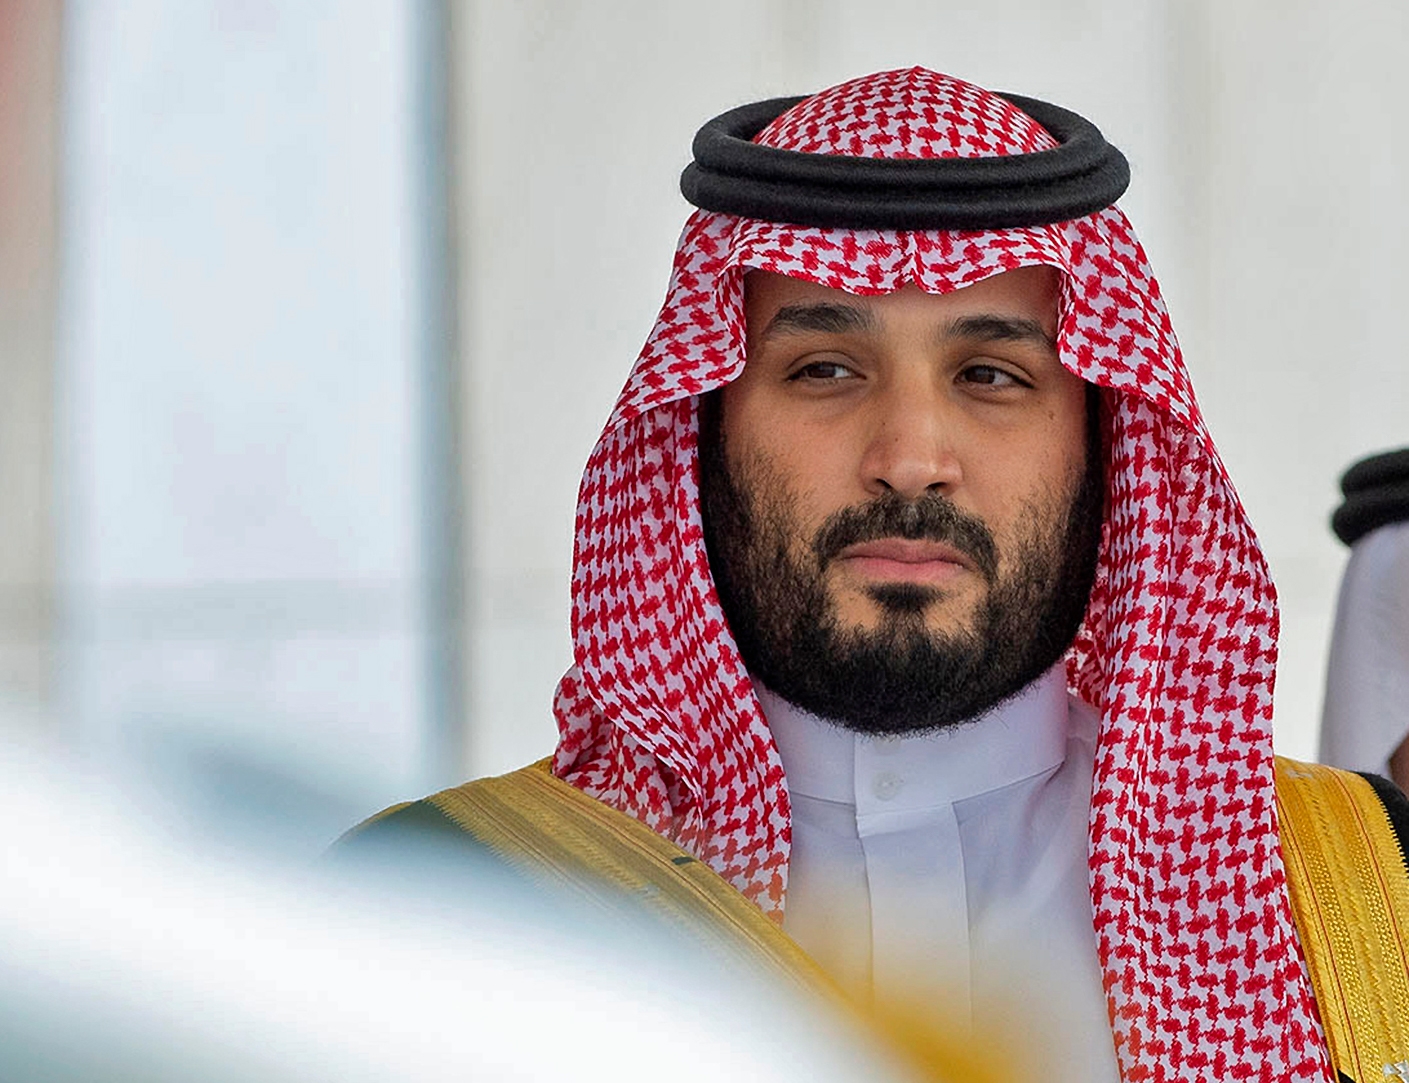 Jabri accused Saudi Crown Prince Mohammed bin Salman of sending a hit squad to Canada in an attempt to kill him.